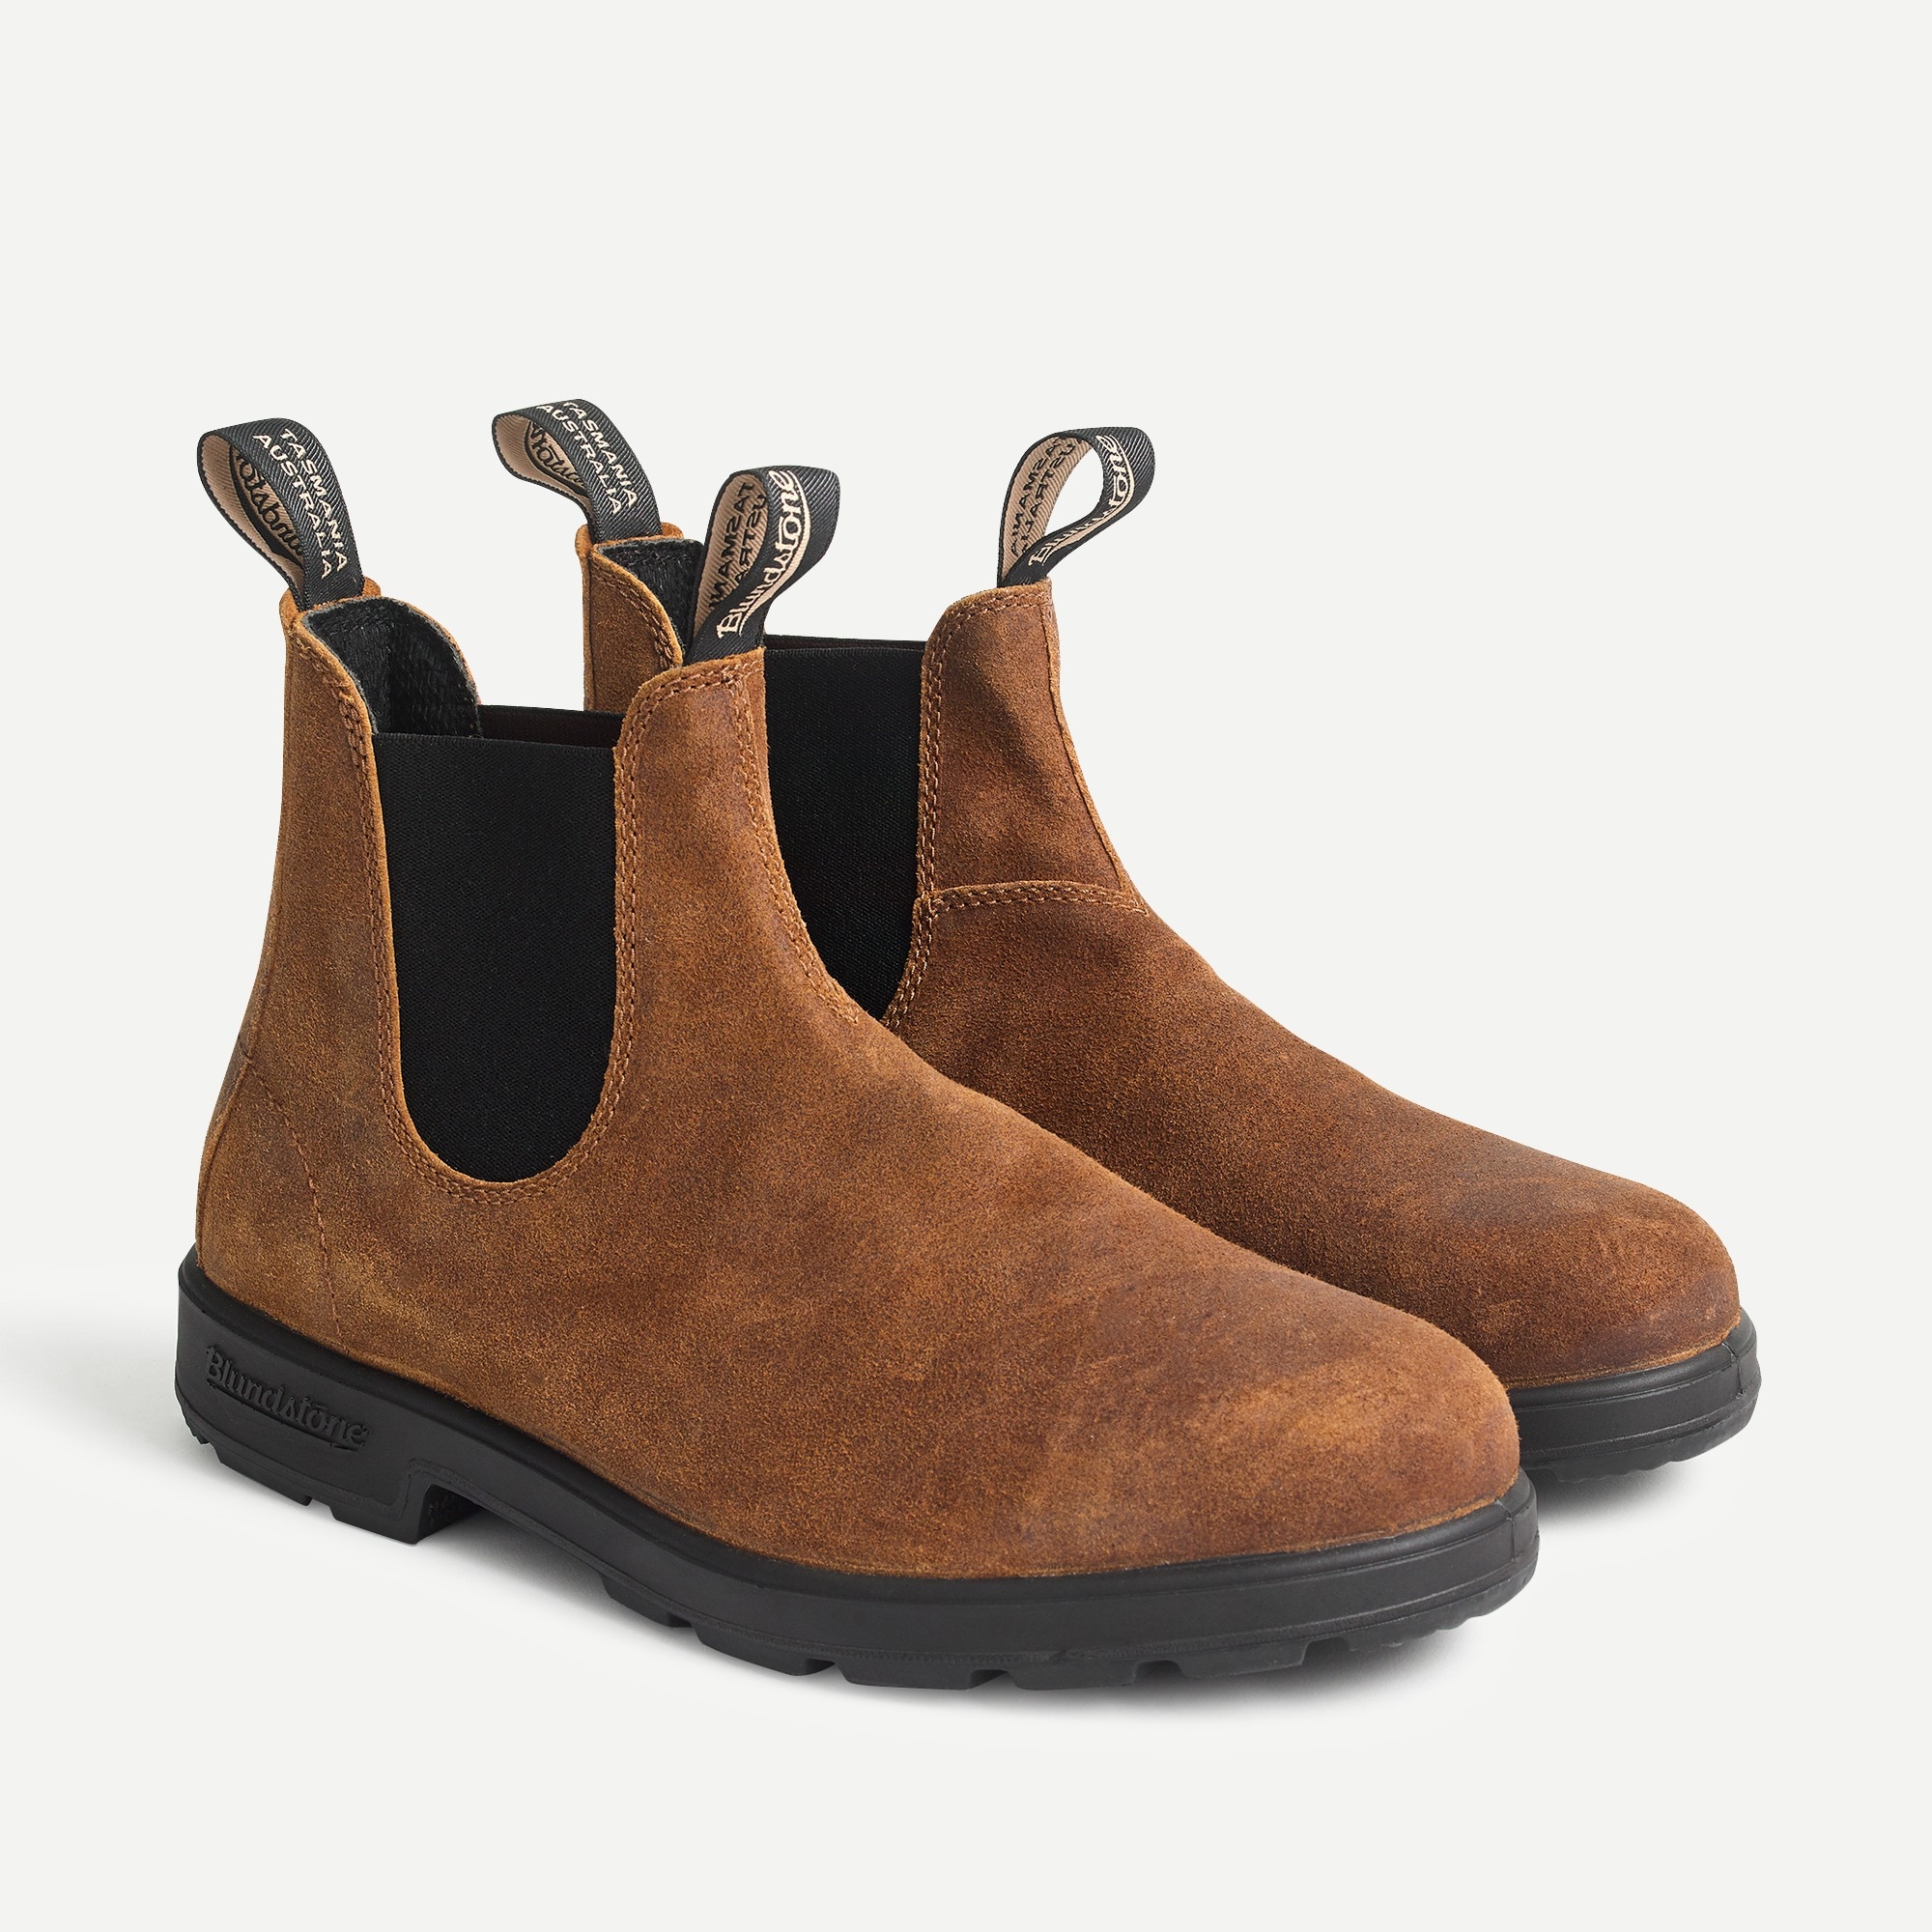 blundstone rubber boots